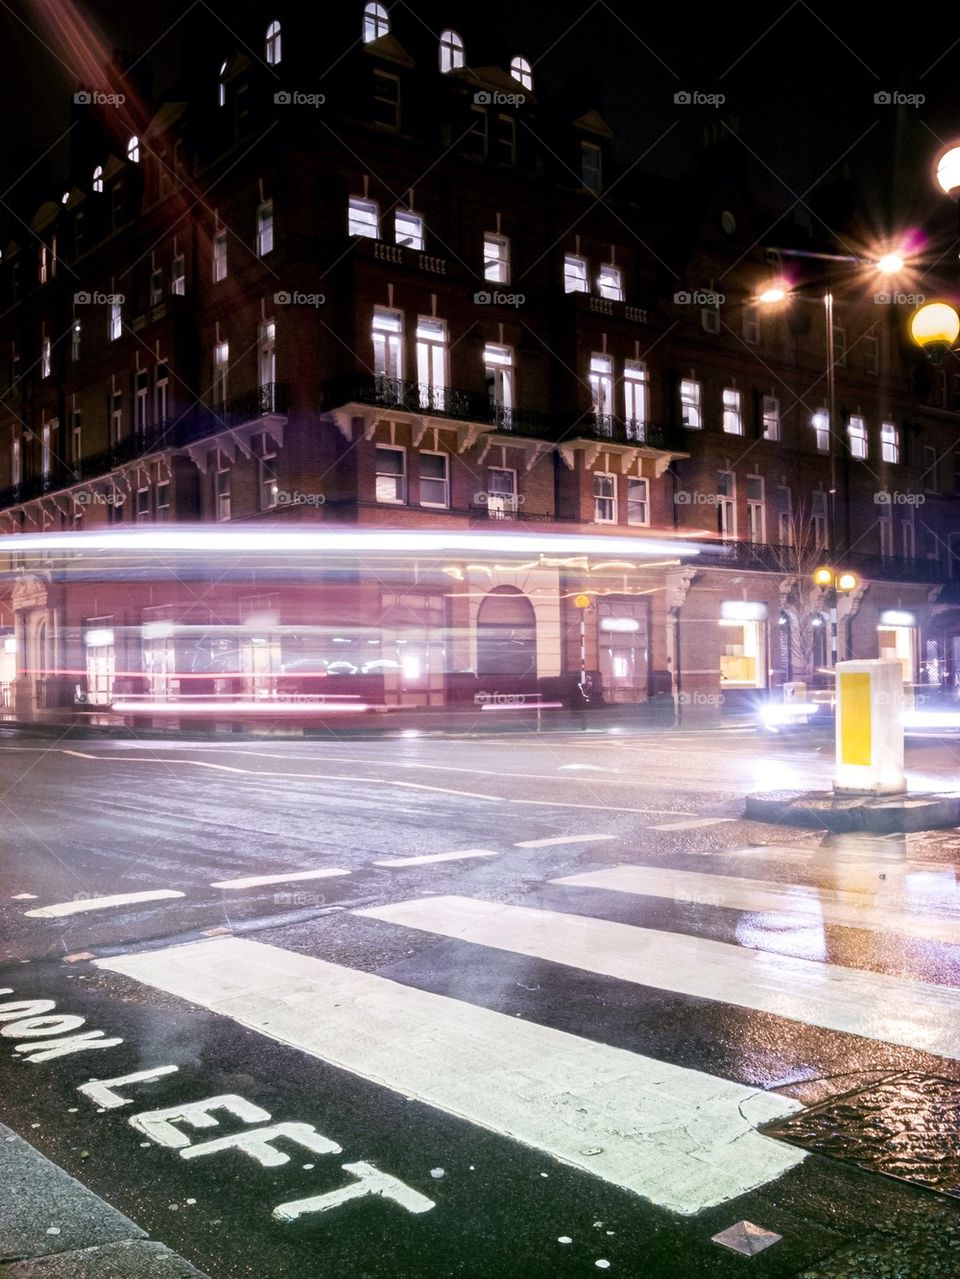 Junction in london at night